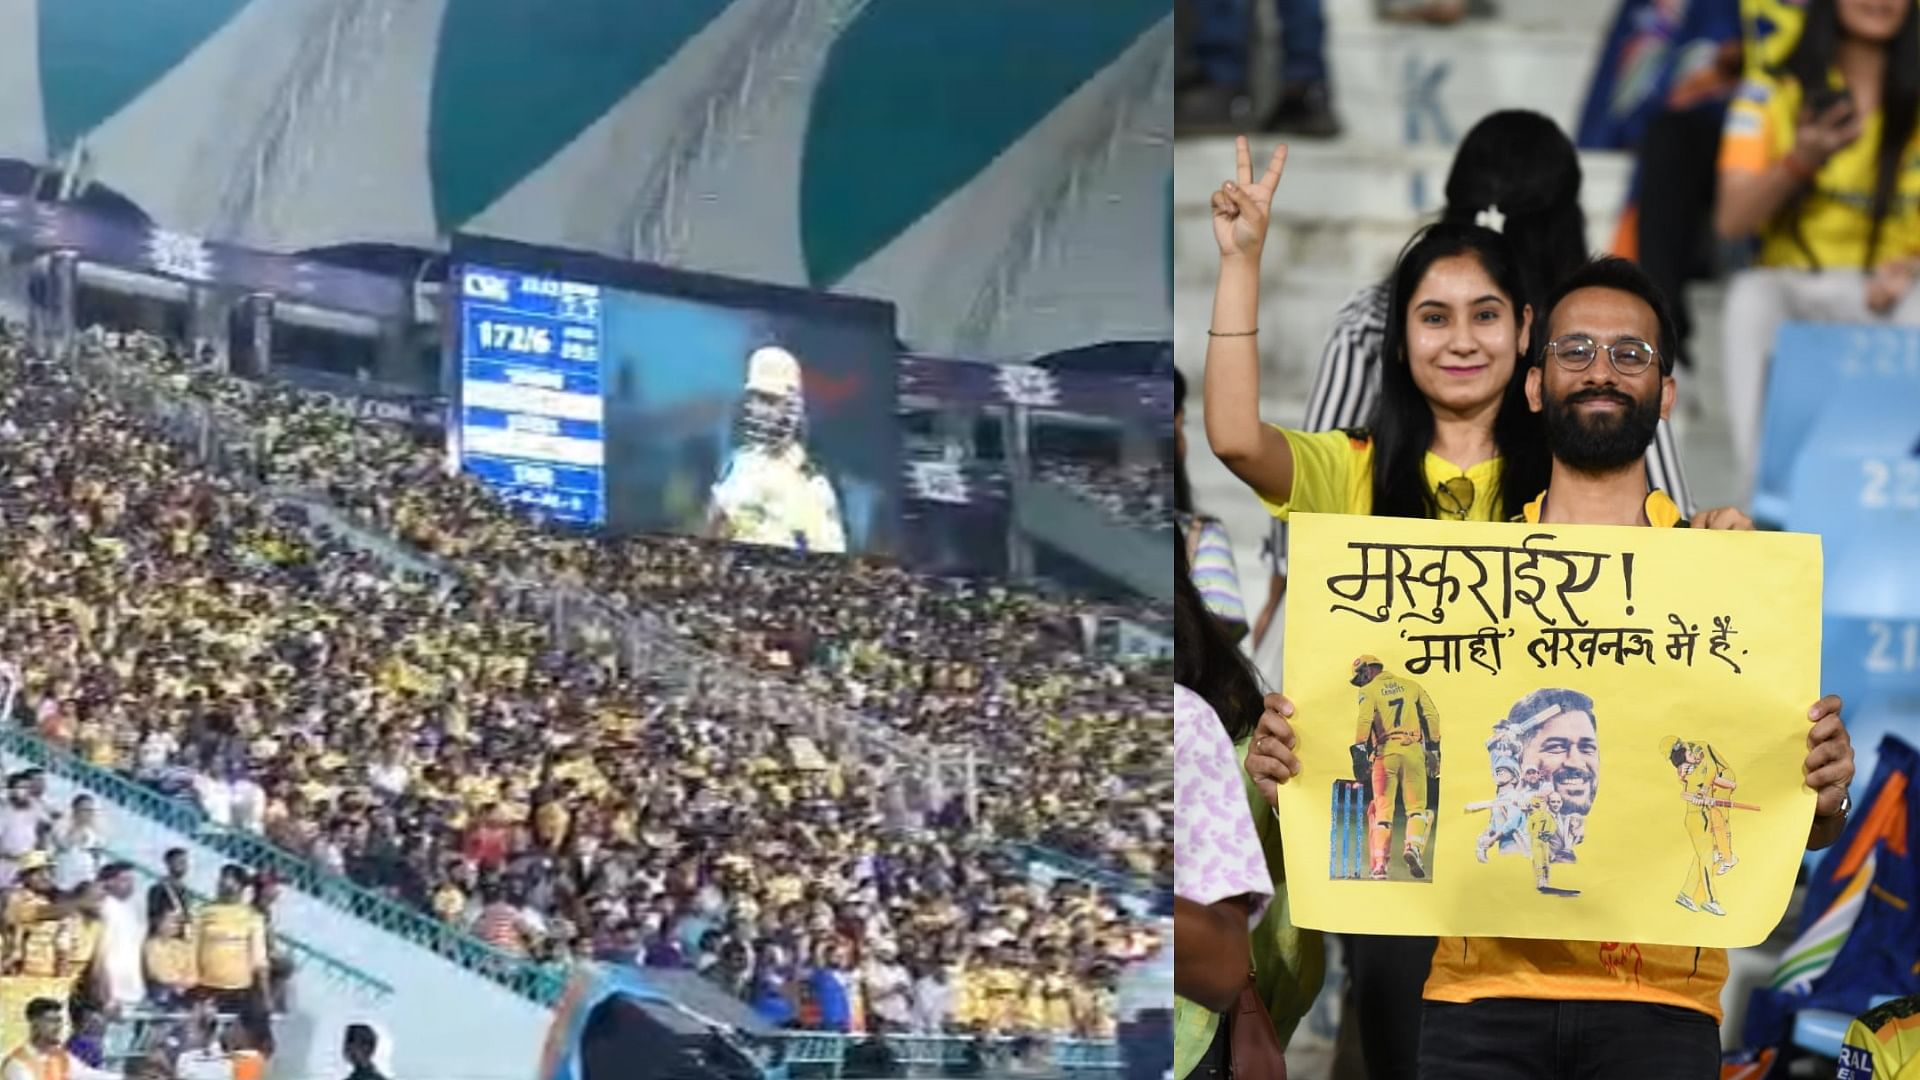 Photos of IPL match between Lucknow and Chennai.